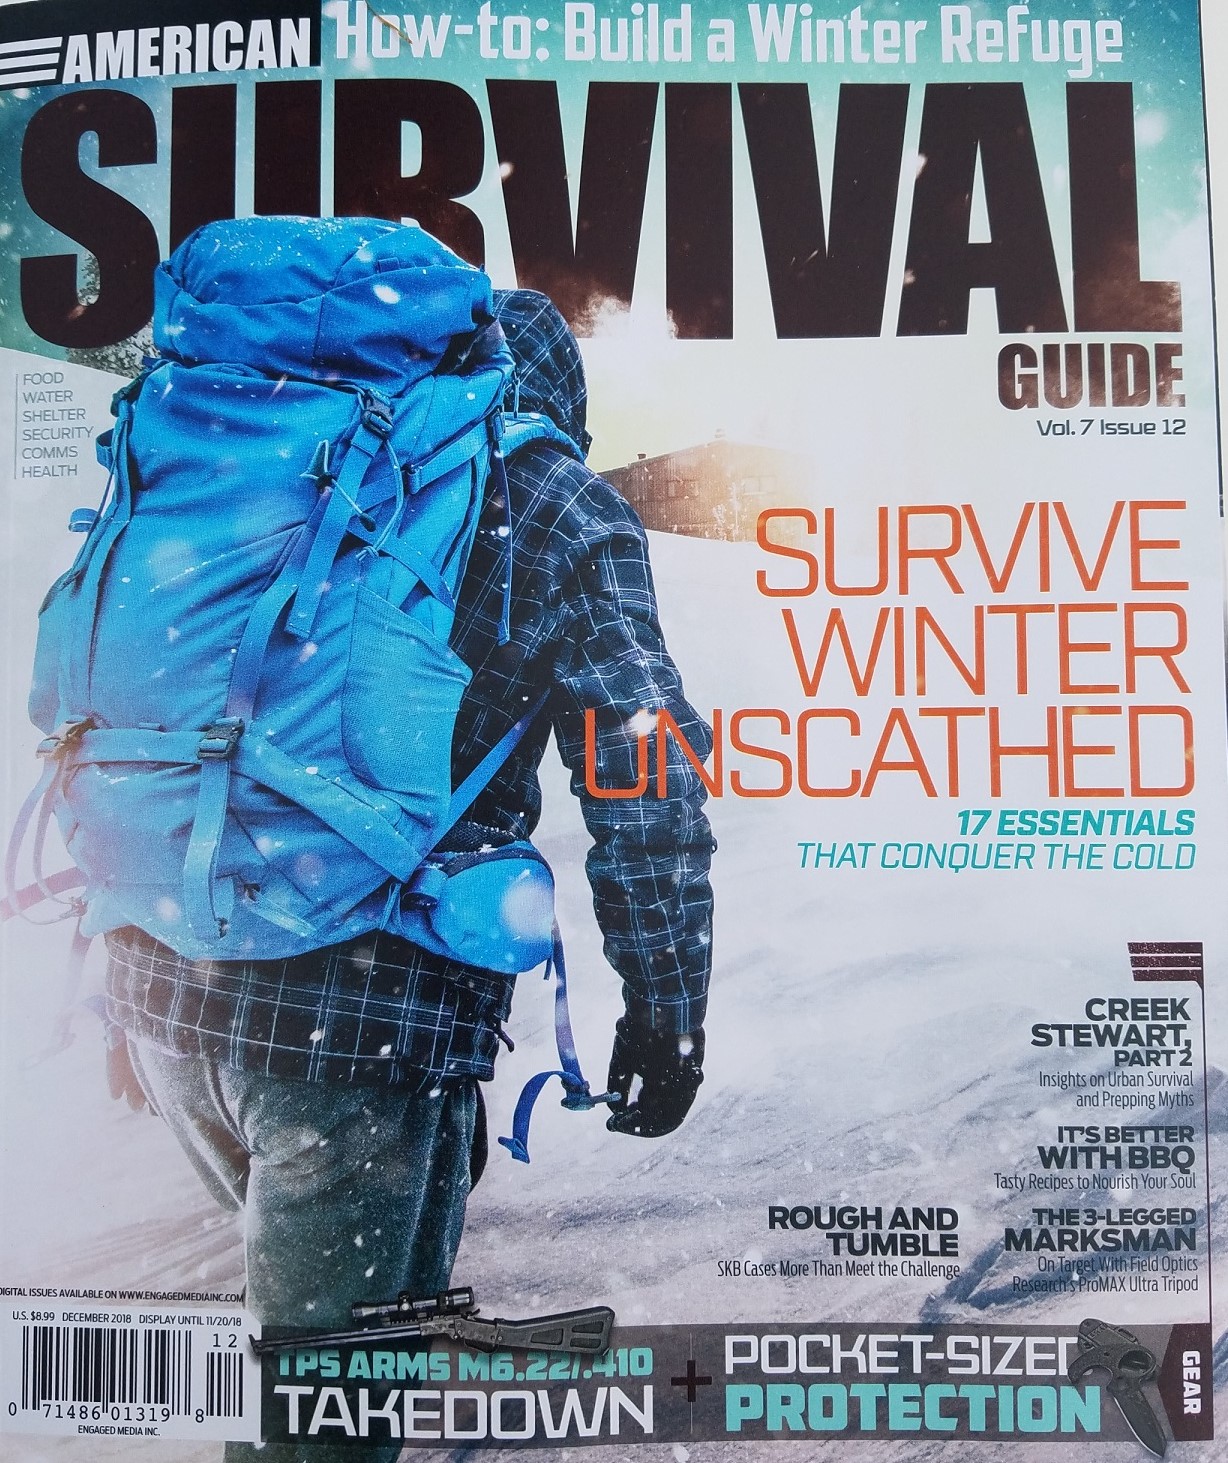 Survival guide cover